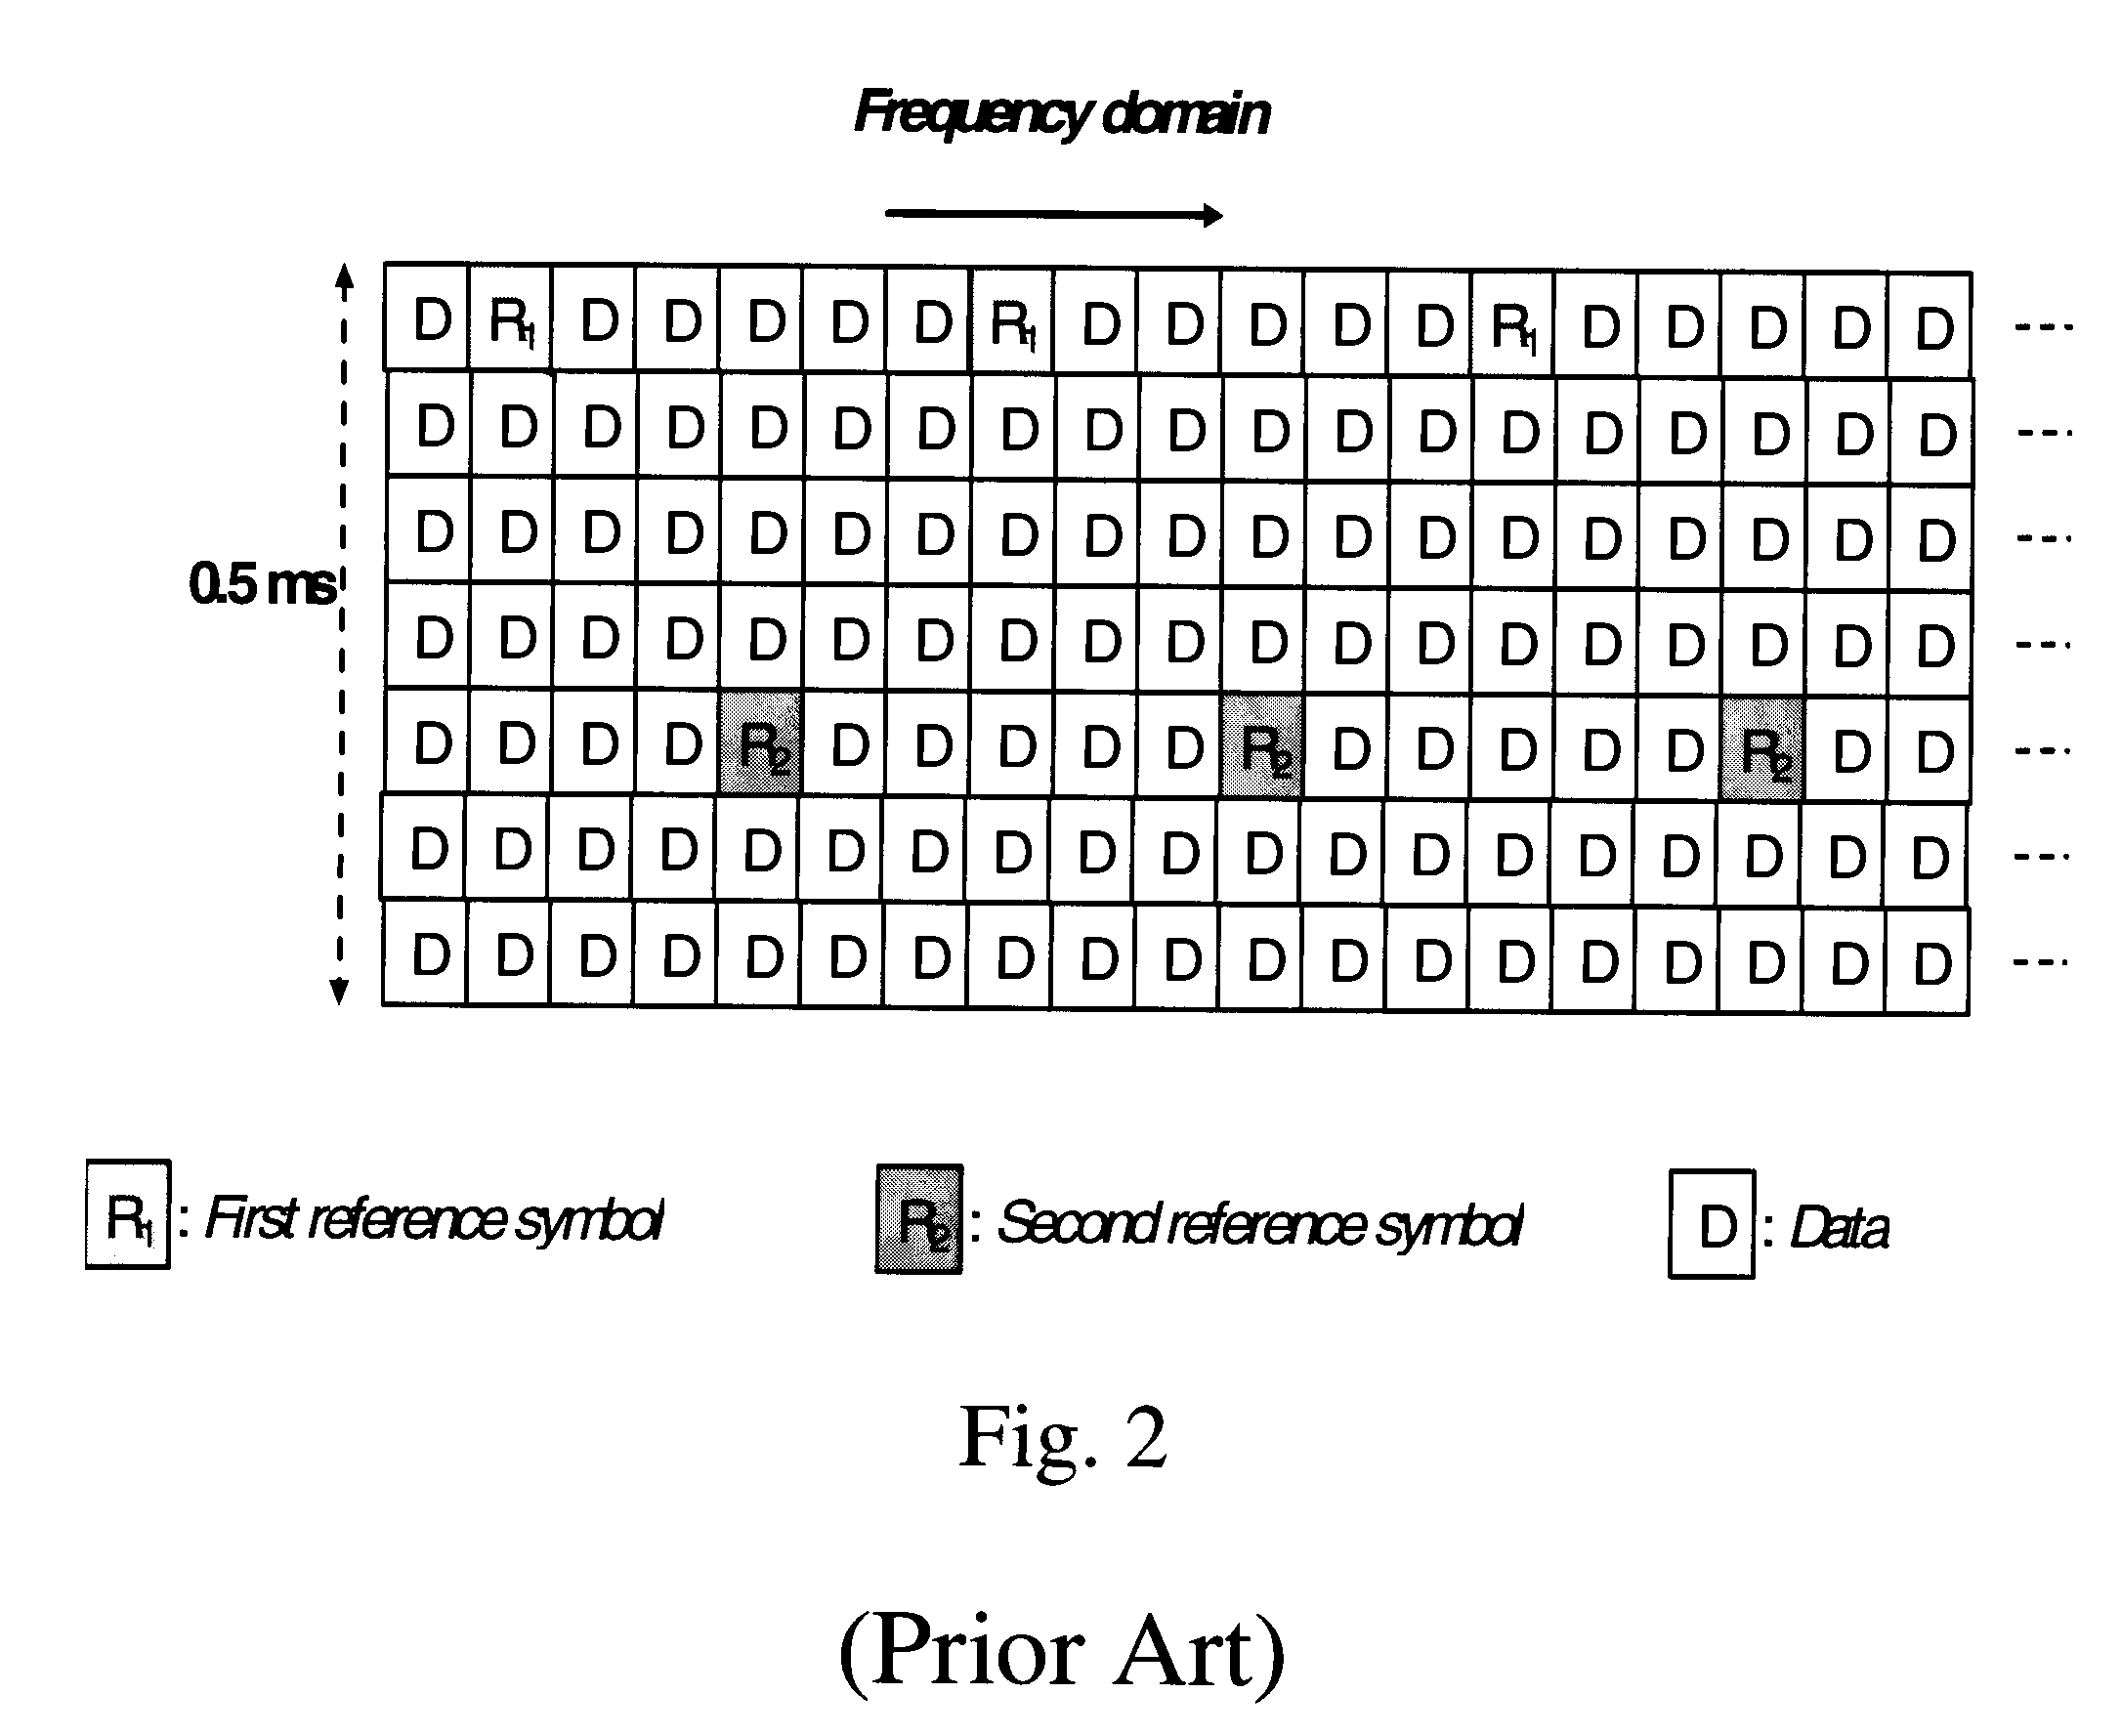 Method, transceiver and telecommunication system for generating reference sequence matrices and for mapping elements thereof